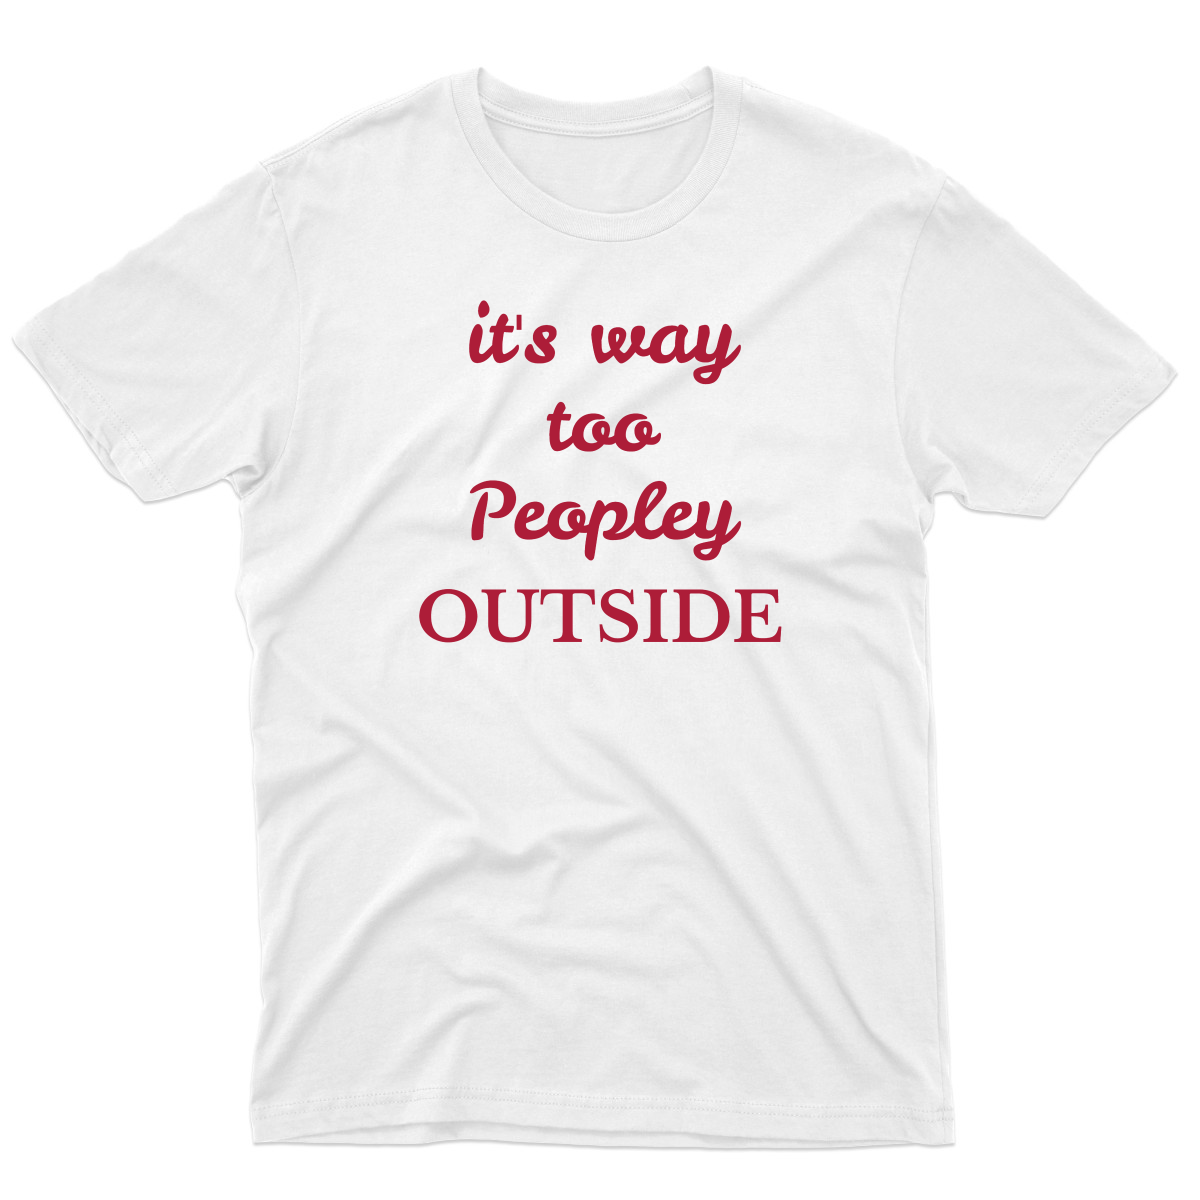 It's way Too Peopley Outside Men's T-shirt | White